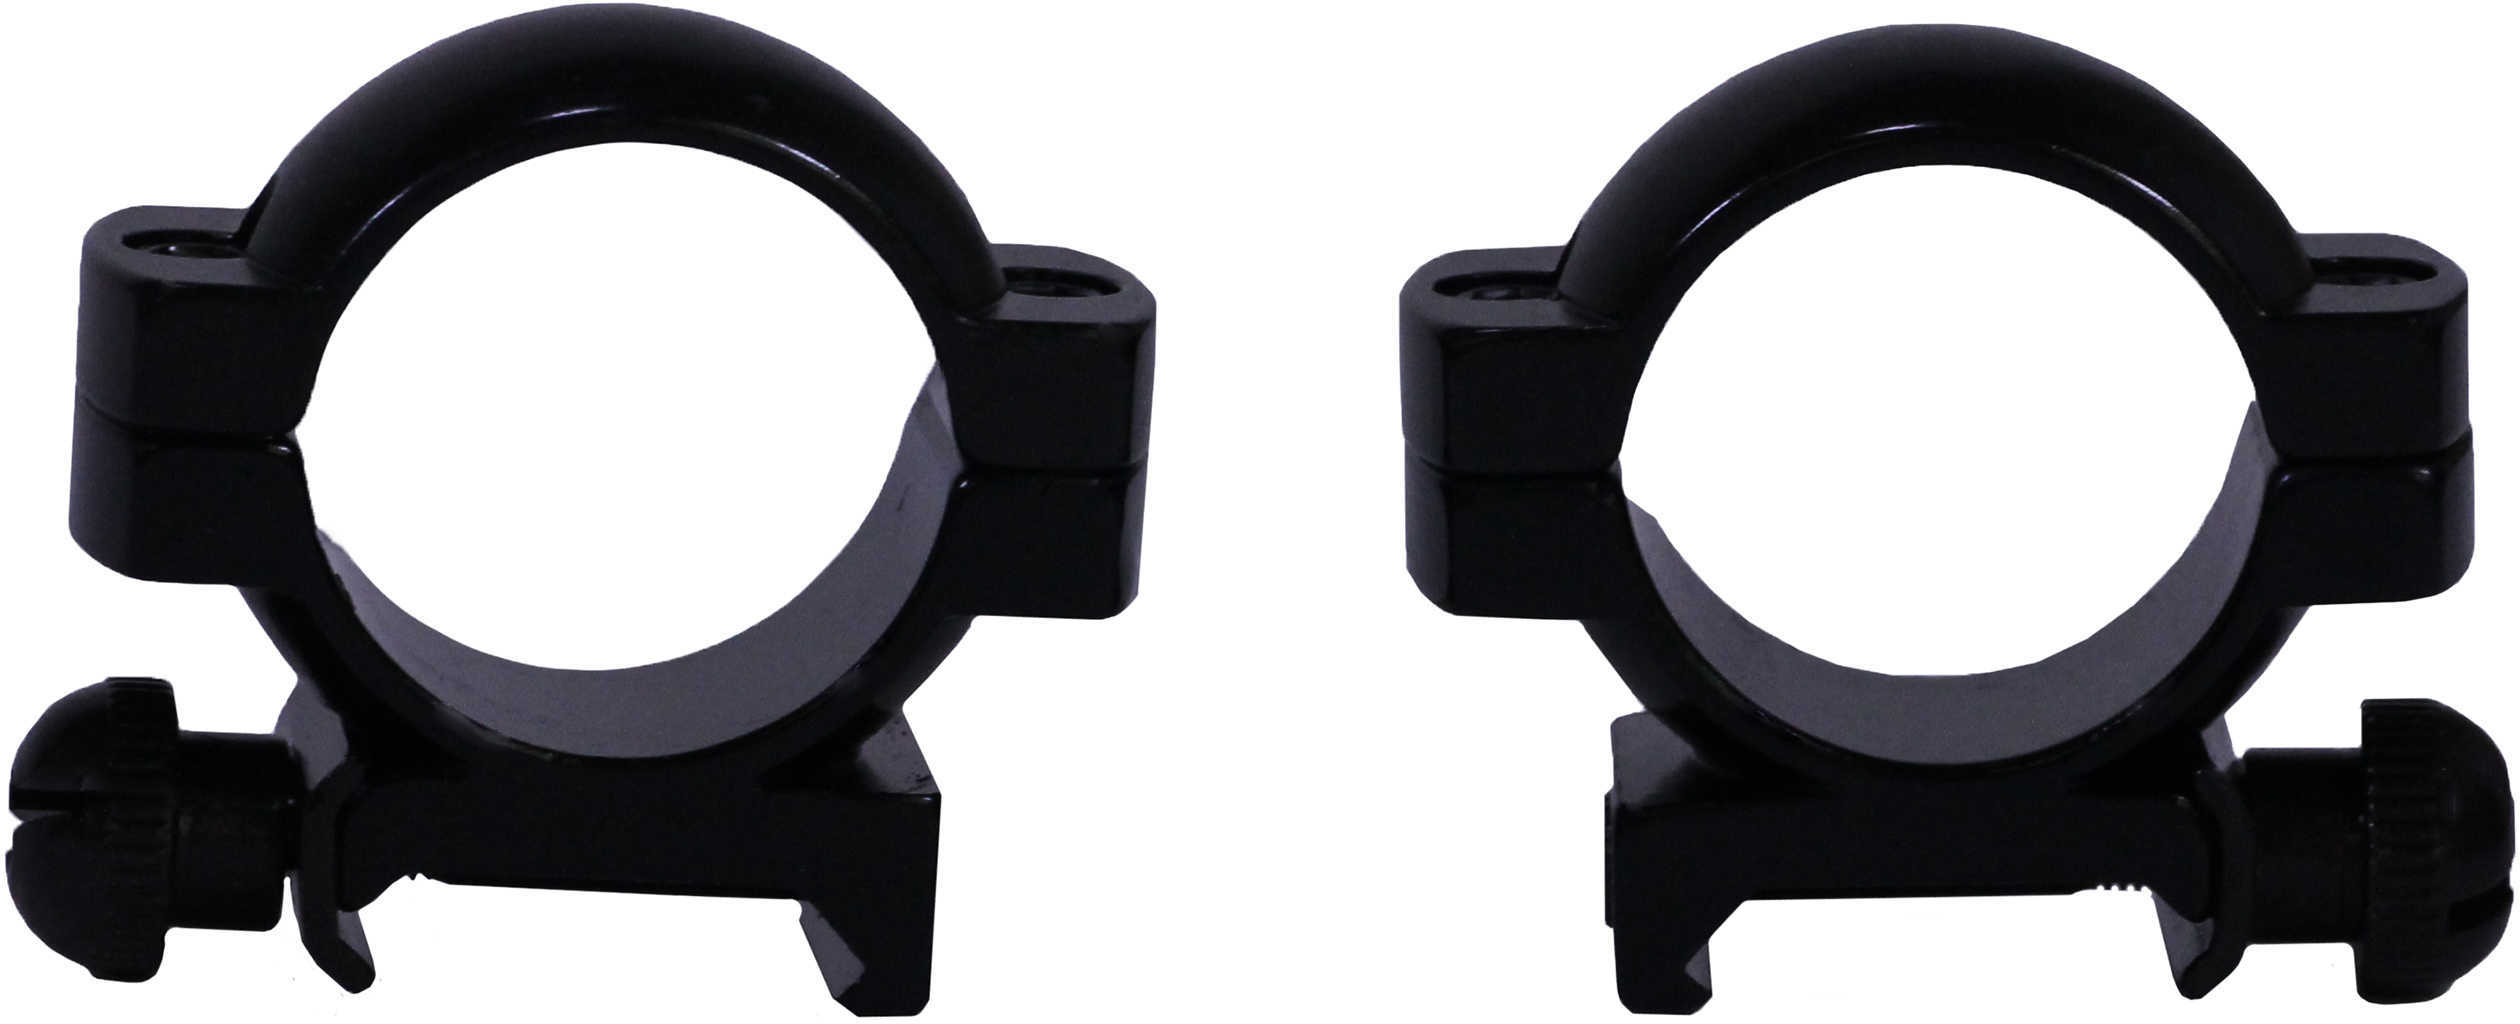 Weaver Simmons Rings With Gloss Black Finish Md: 49167